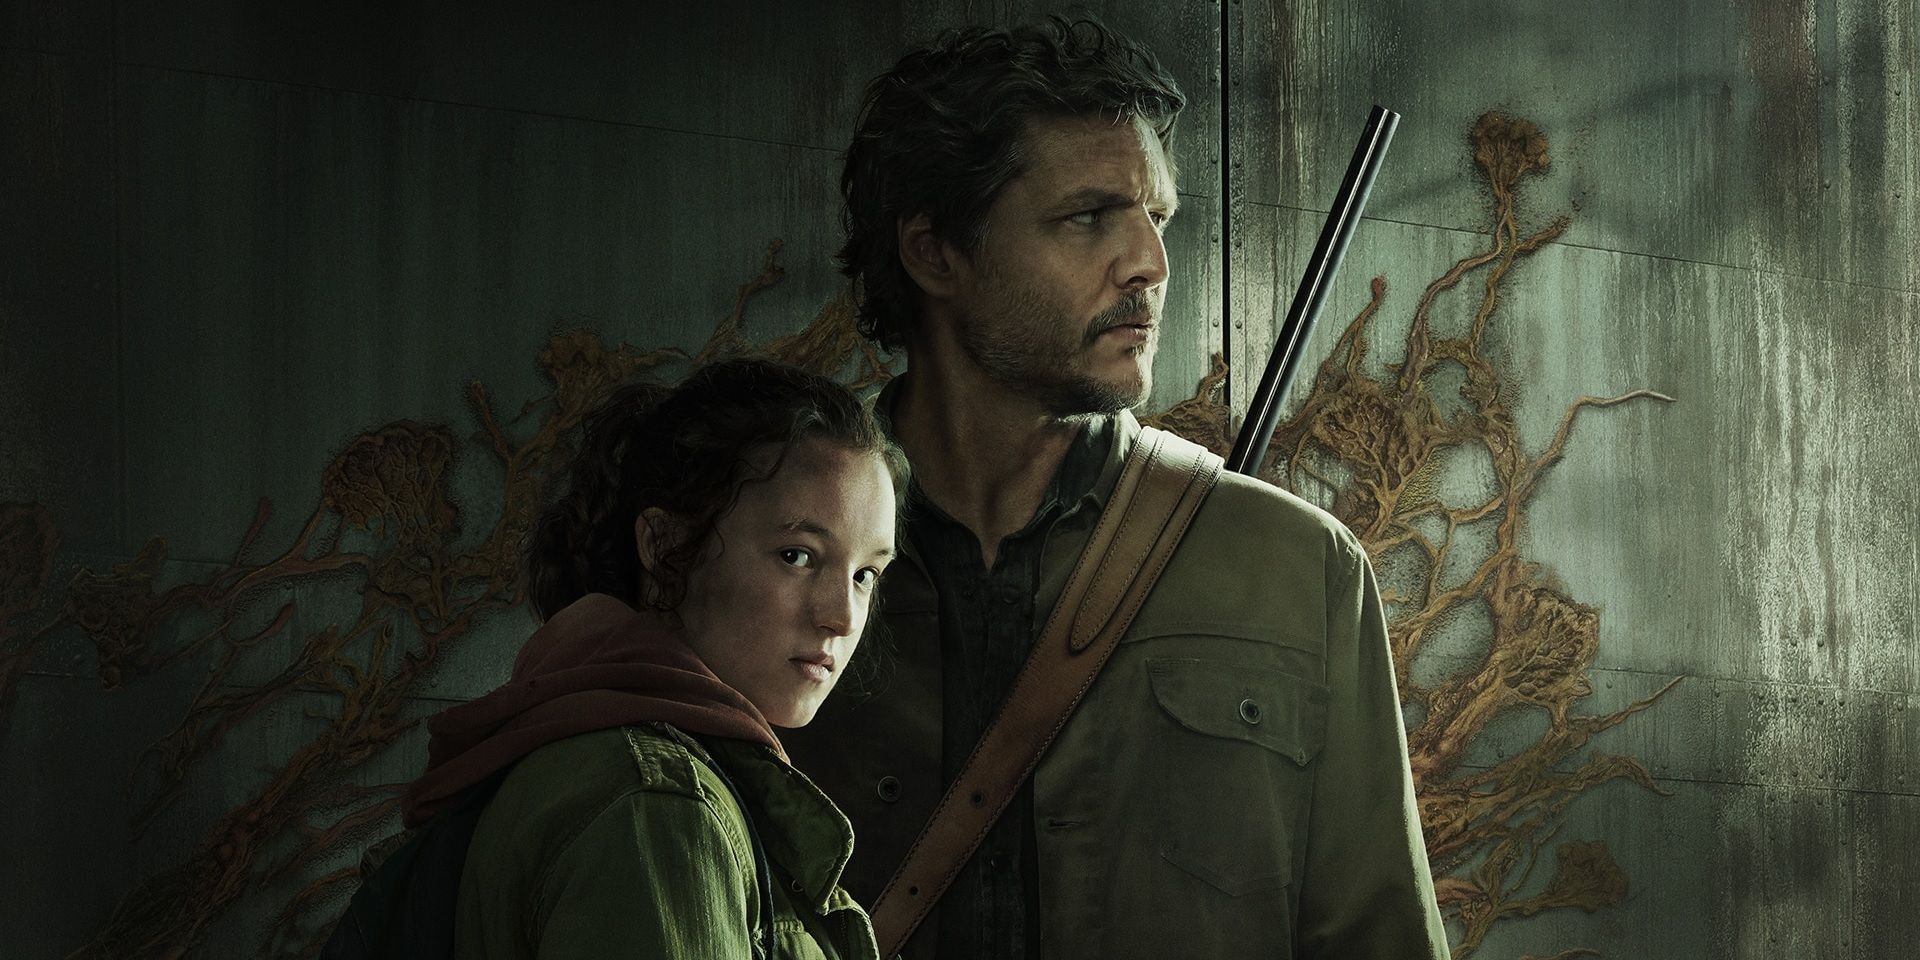 Pedro Pascal and Bella Ramsey on the poster for The Last of Us